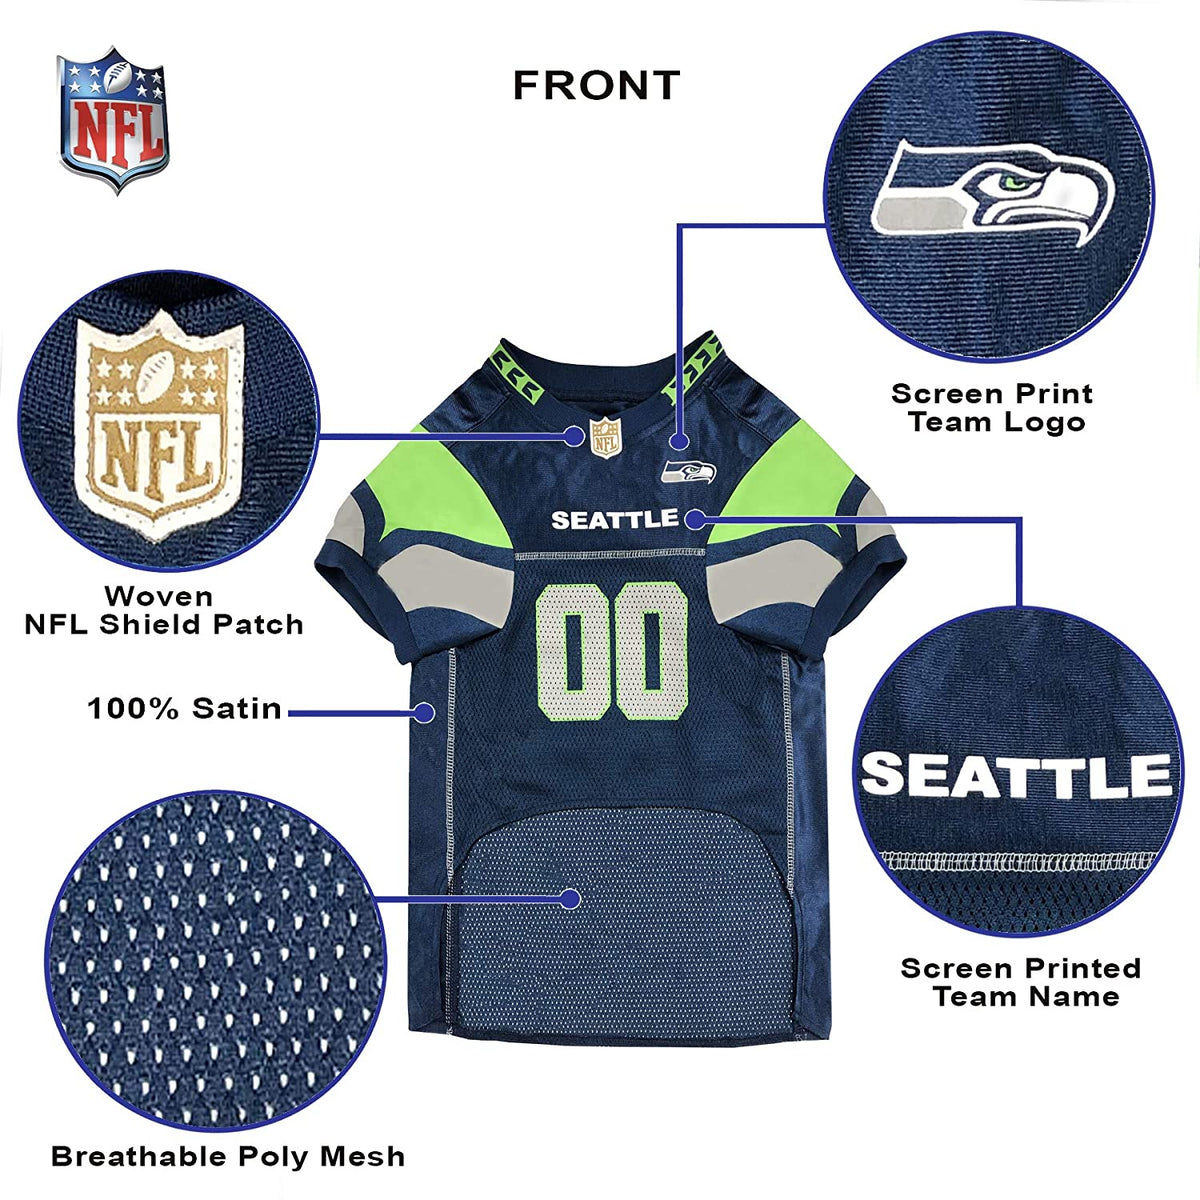 Seattle Seahawks Pet Jersey - 3 Red Rovers